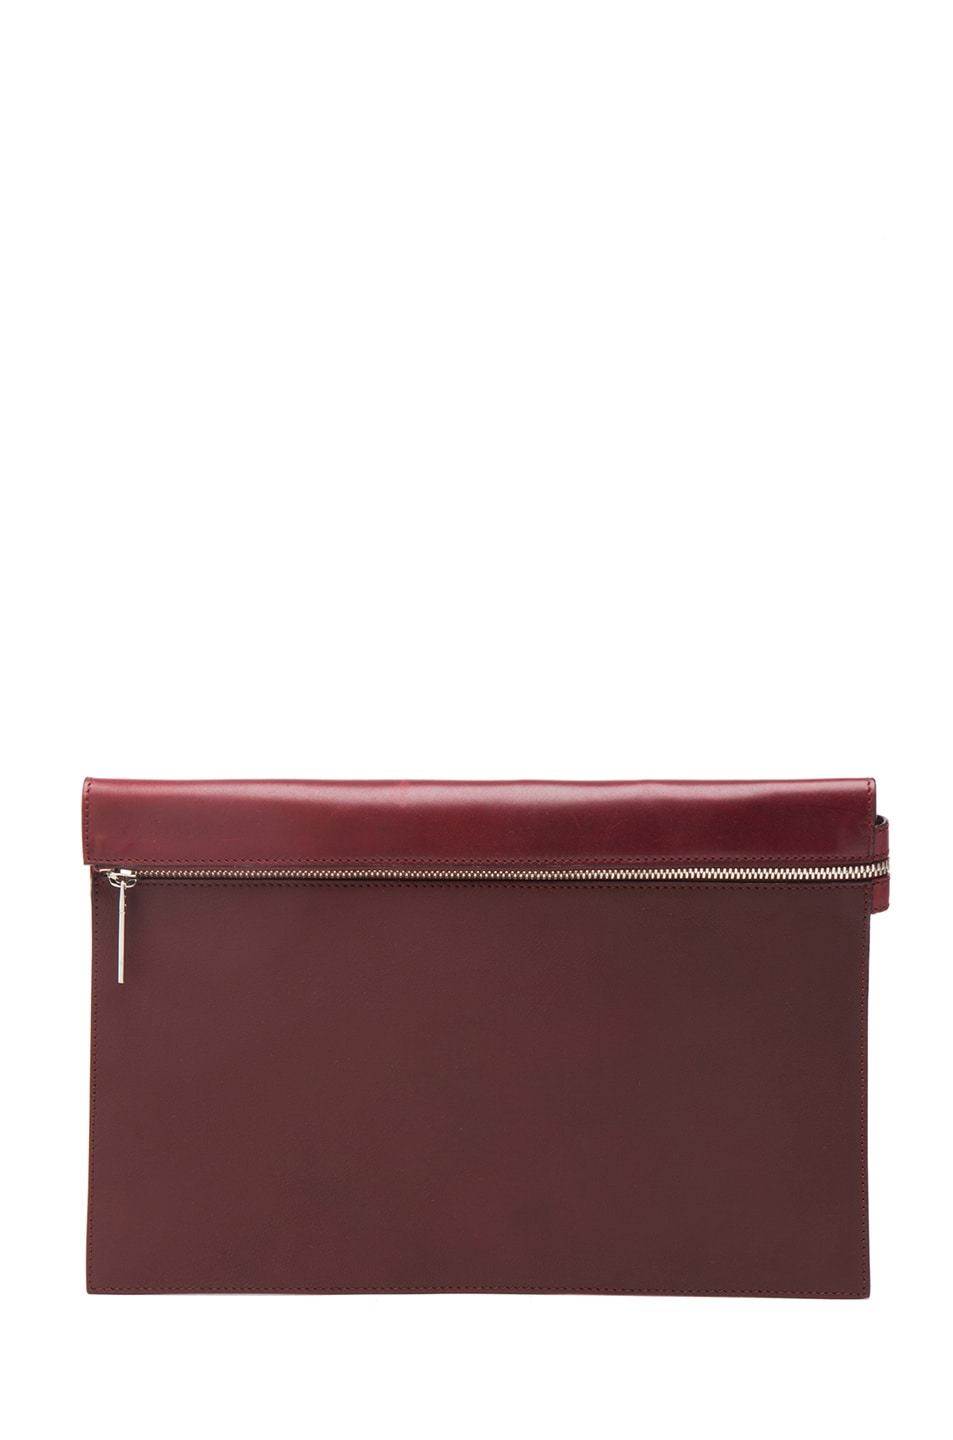 Image 1 of Victoria Beckham Large Zip Pouch in Oxblood